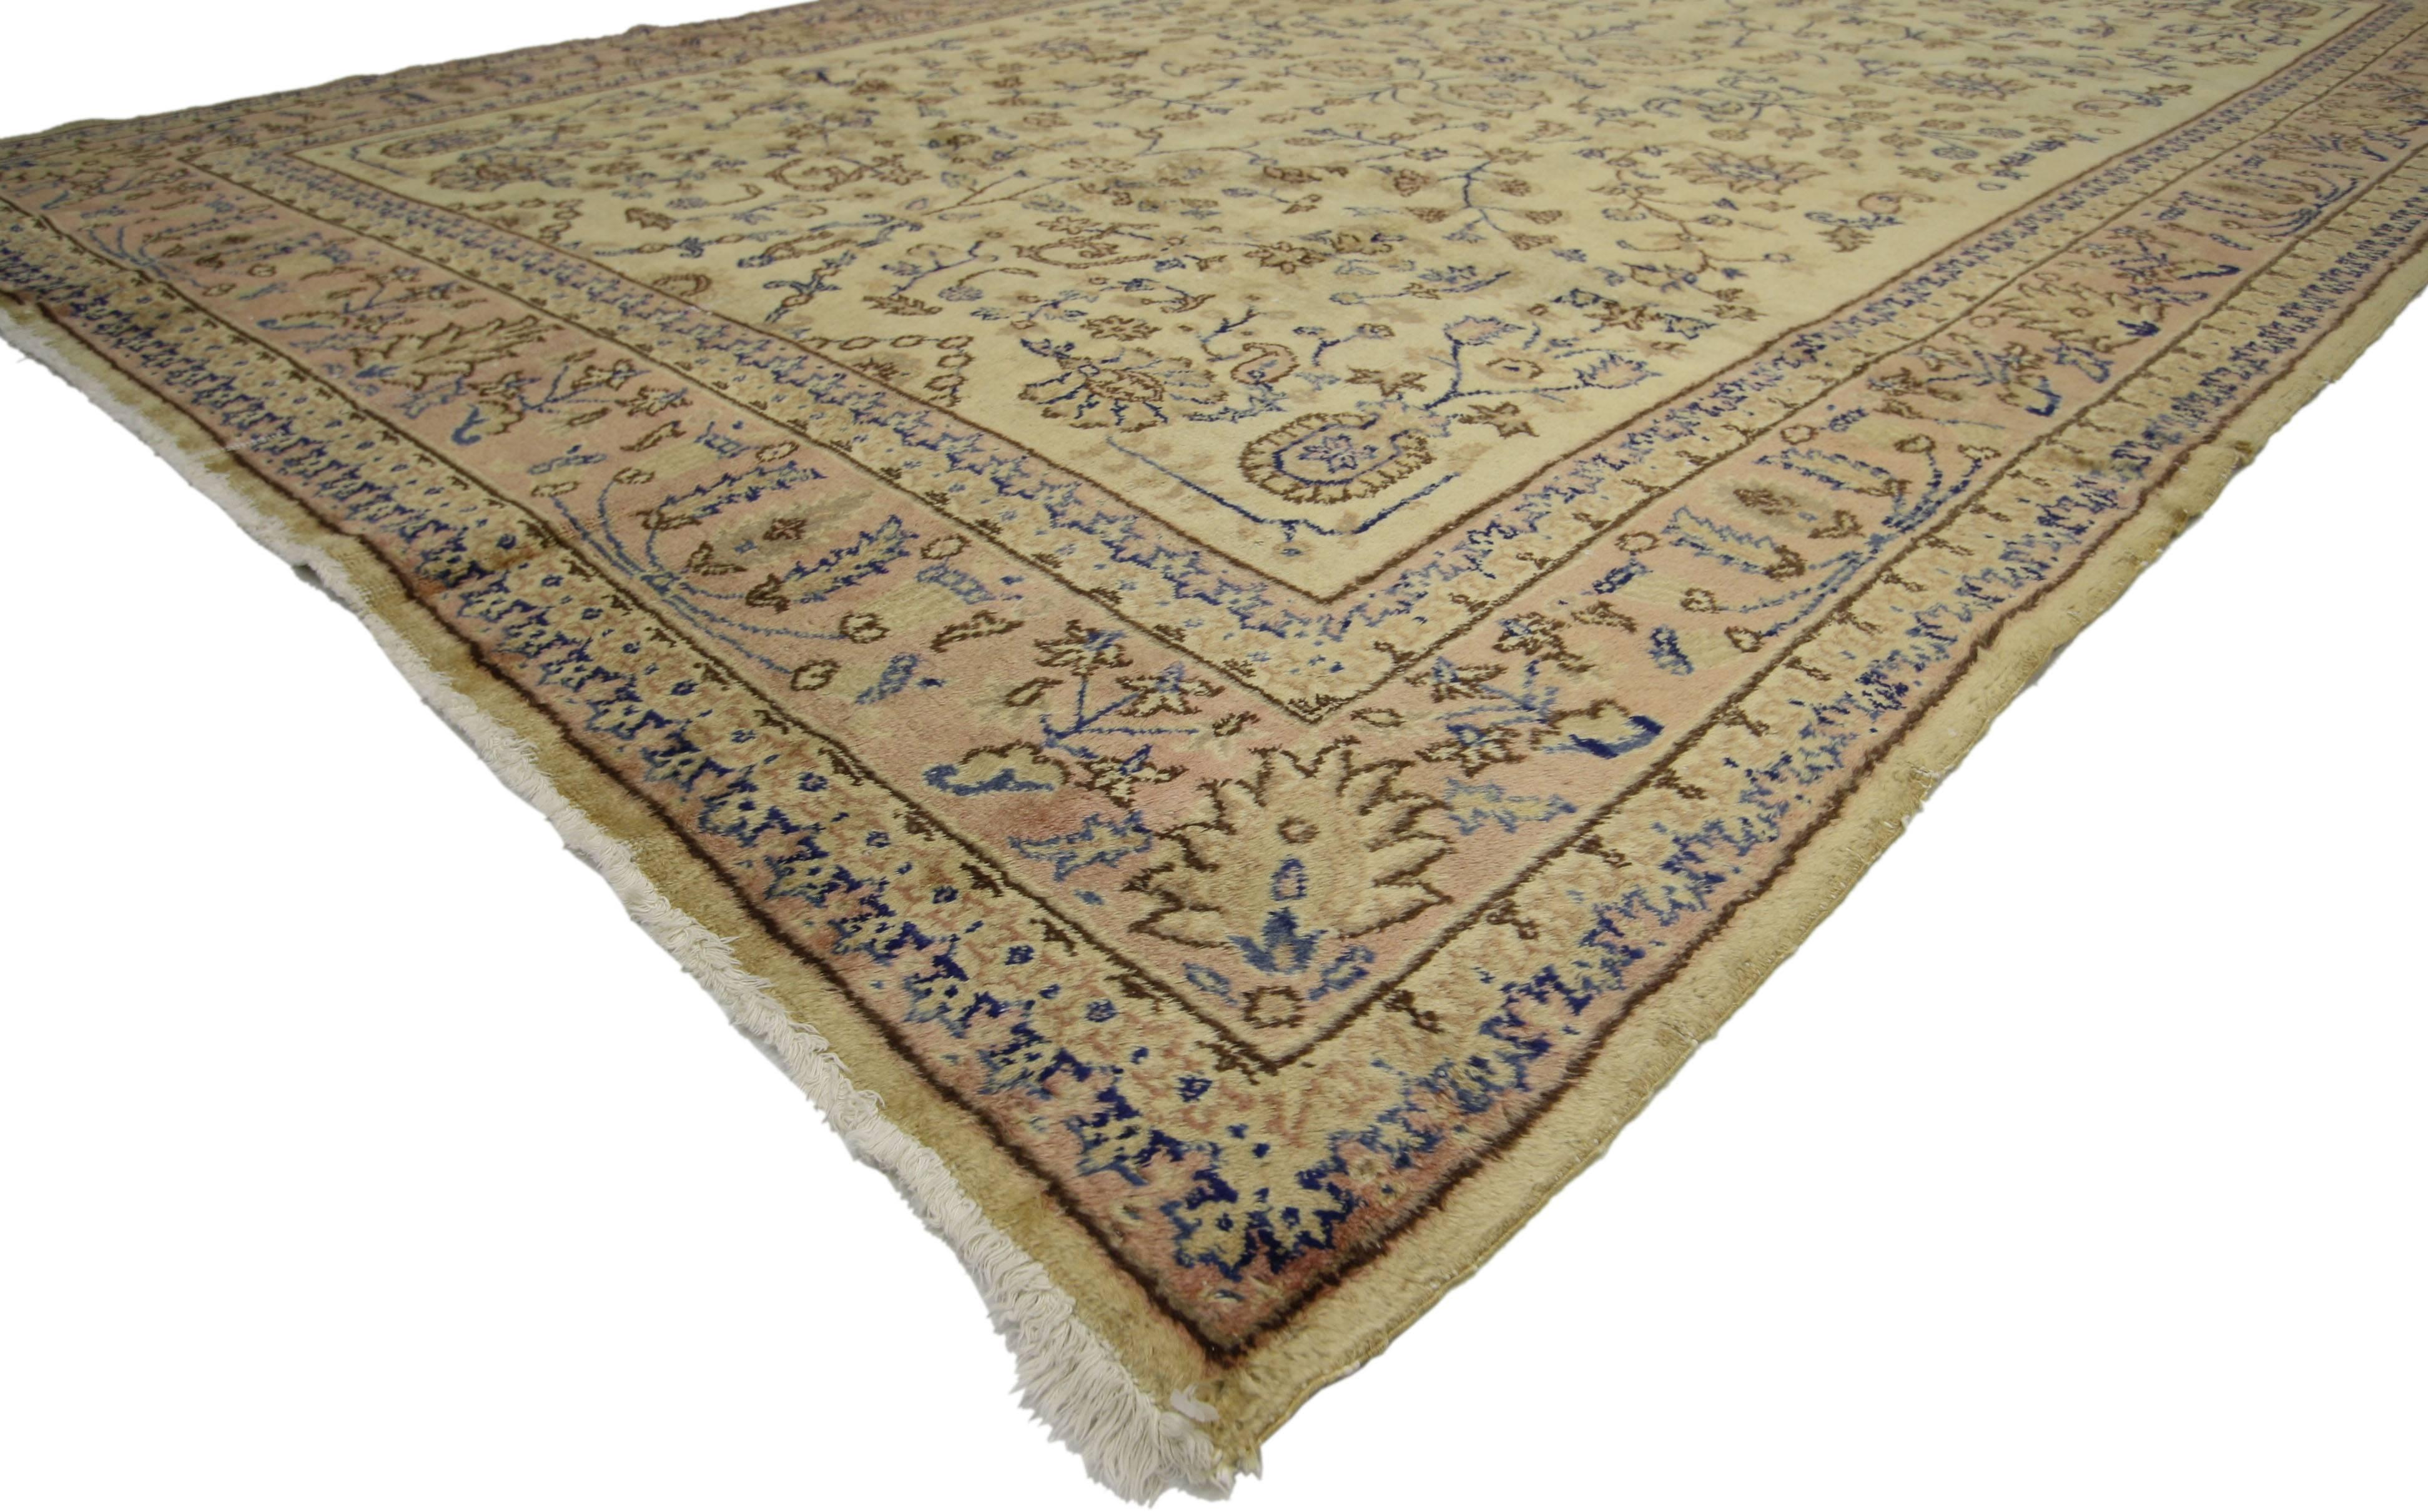 70246 Vintage Turkish Sparta Rug with Romantic French Provincial Style 08'04 x 11'10. This hand knotted wool vintage Turkish Sparta rug with light colors features an all-over botanical pattern composed of blooming florals, palmettes and meandering